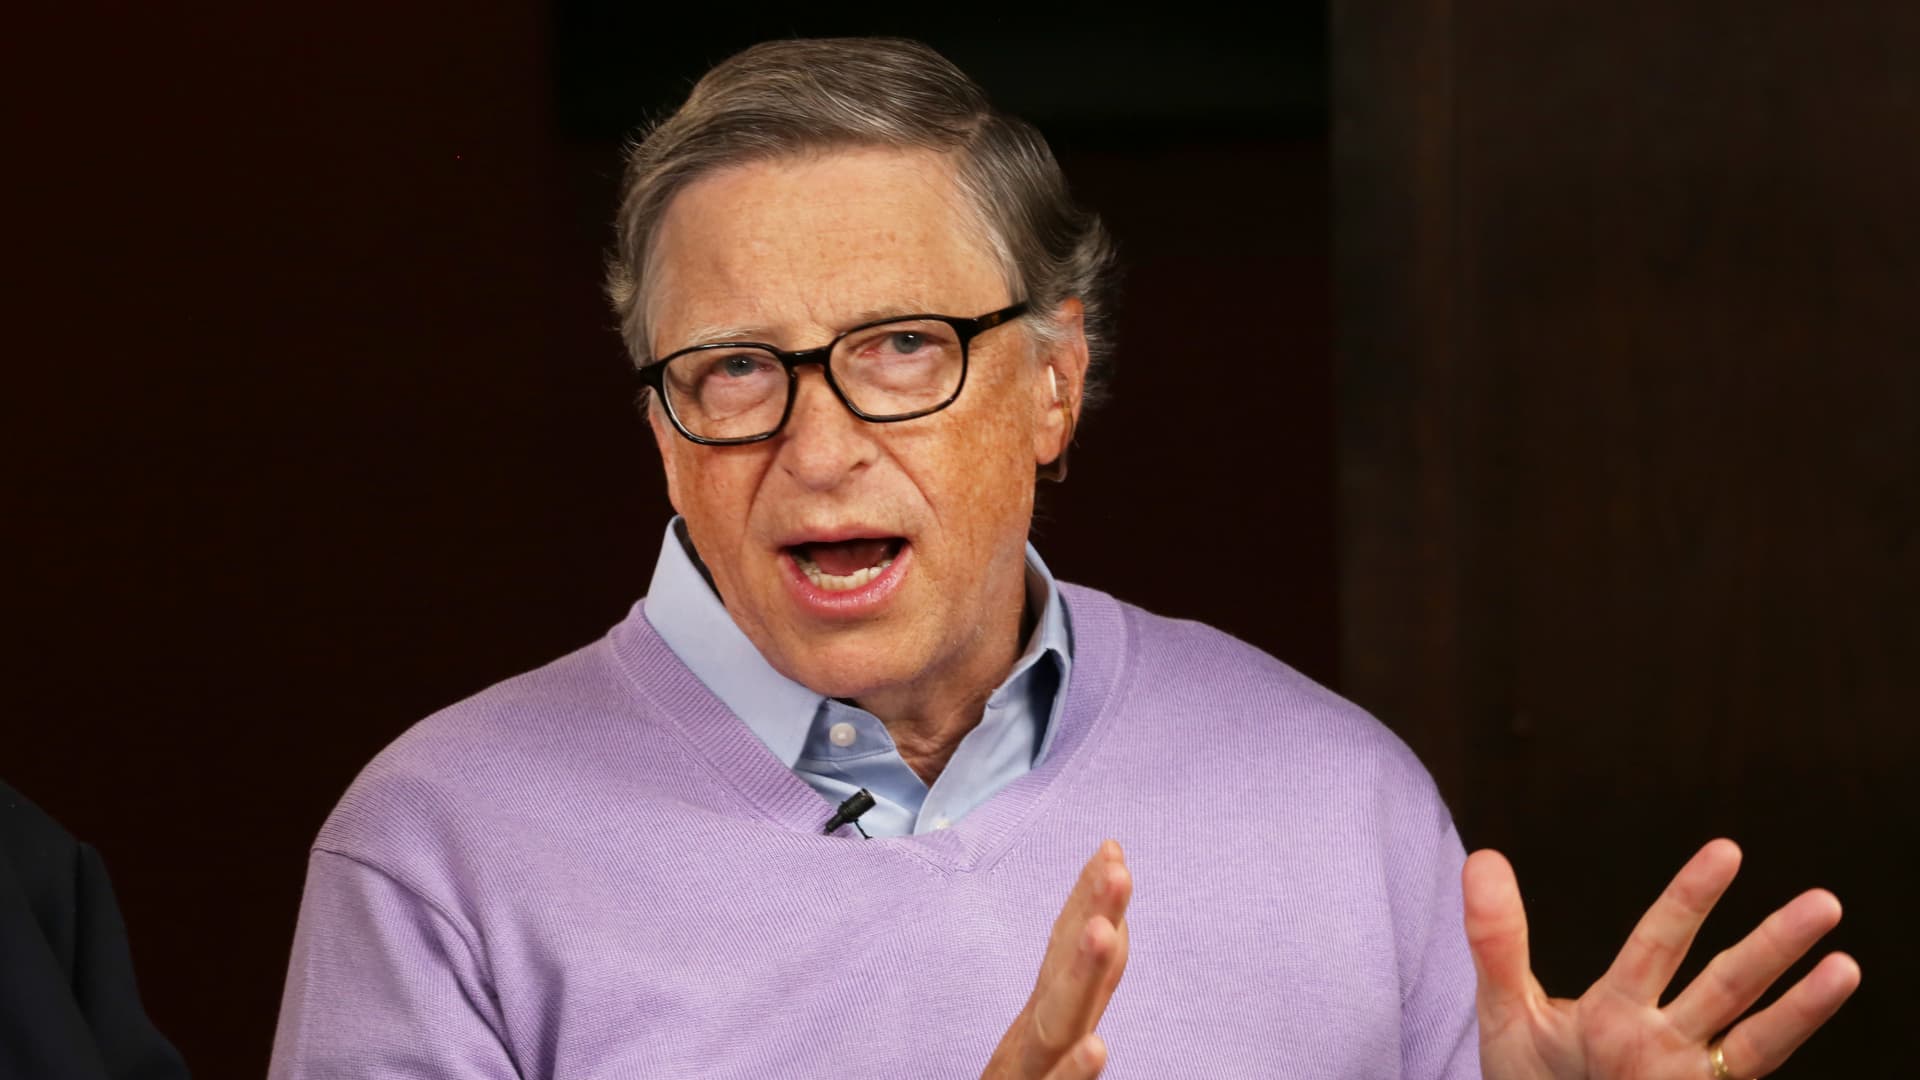 Bill Gates says crypto and NFTs are ‘100% based on greater fool theory’